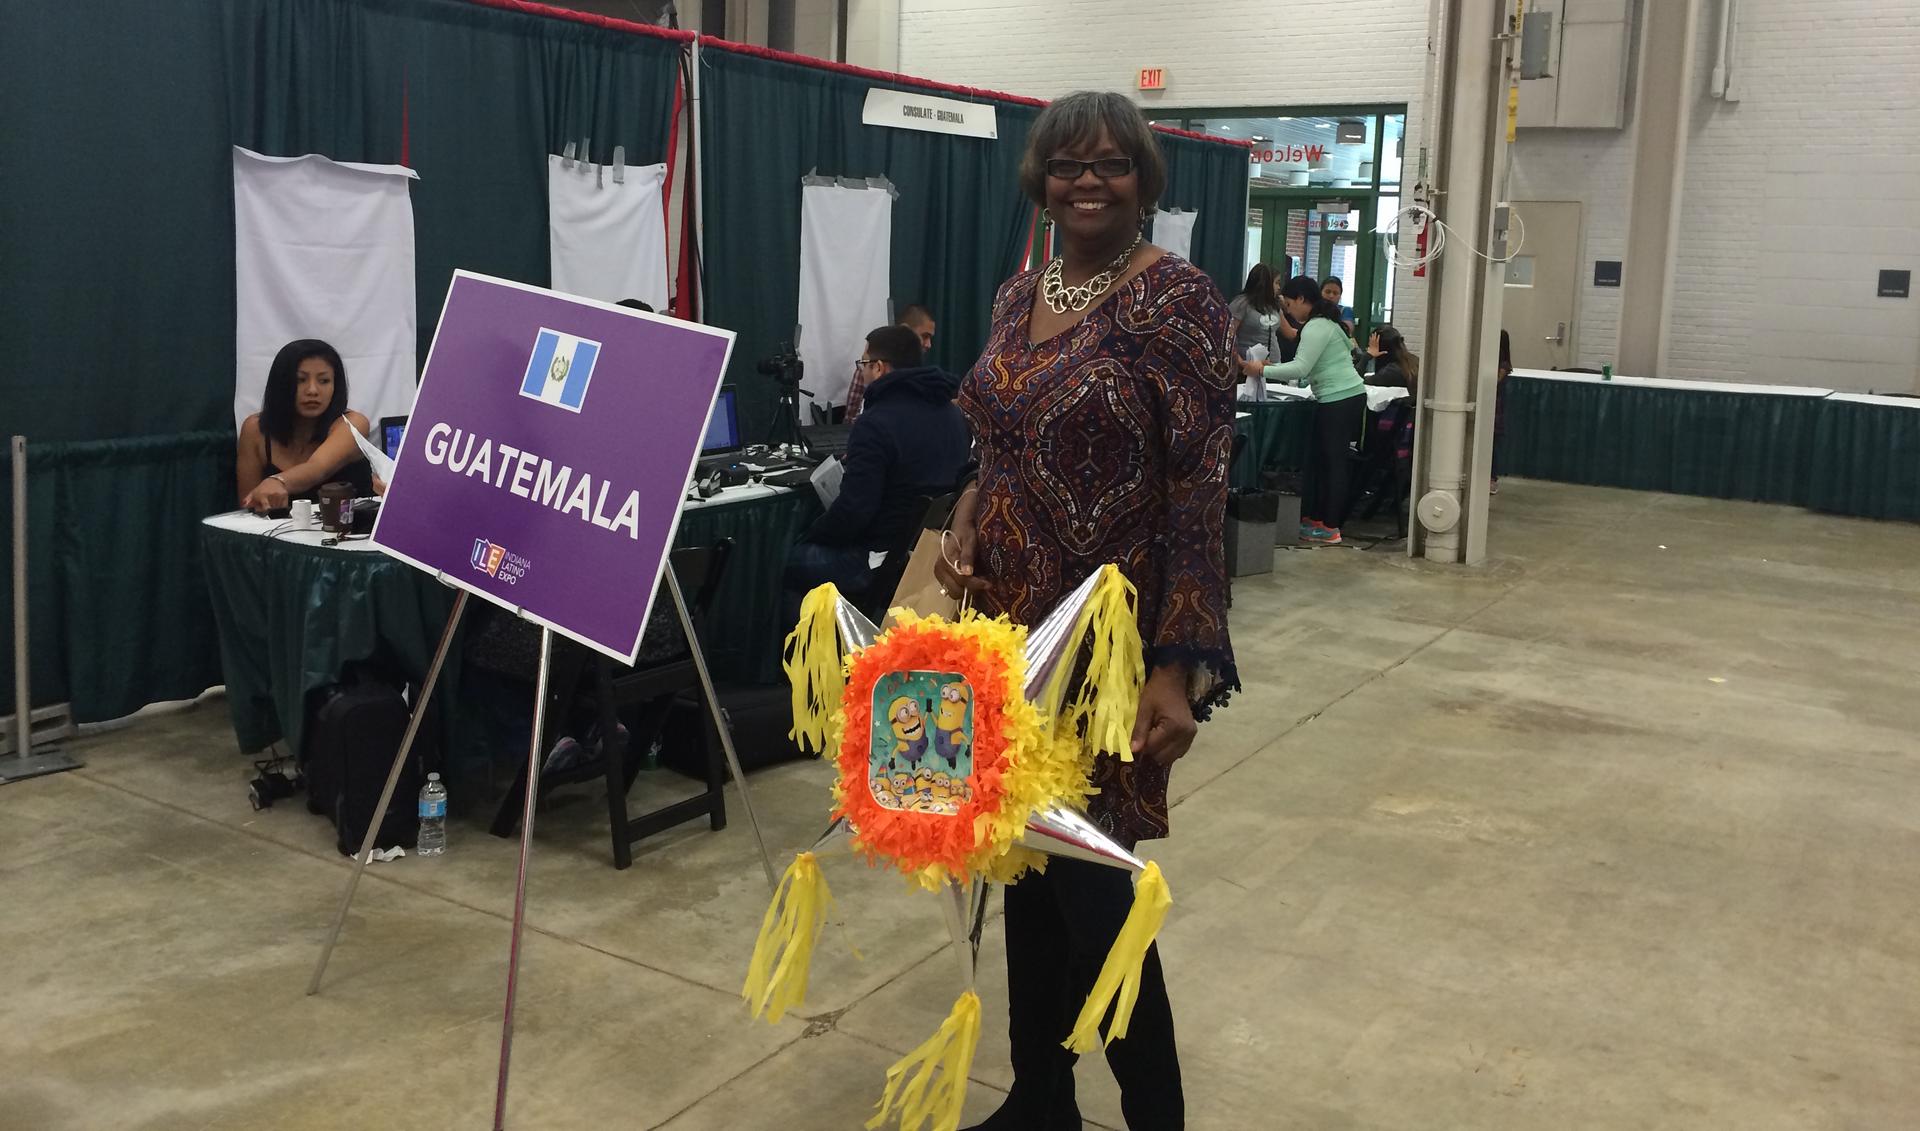 A woman stands in conference area in front of "Guatemala" sign